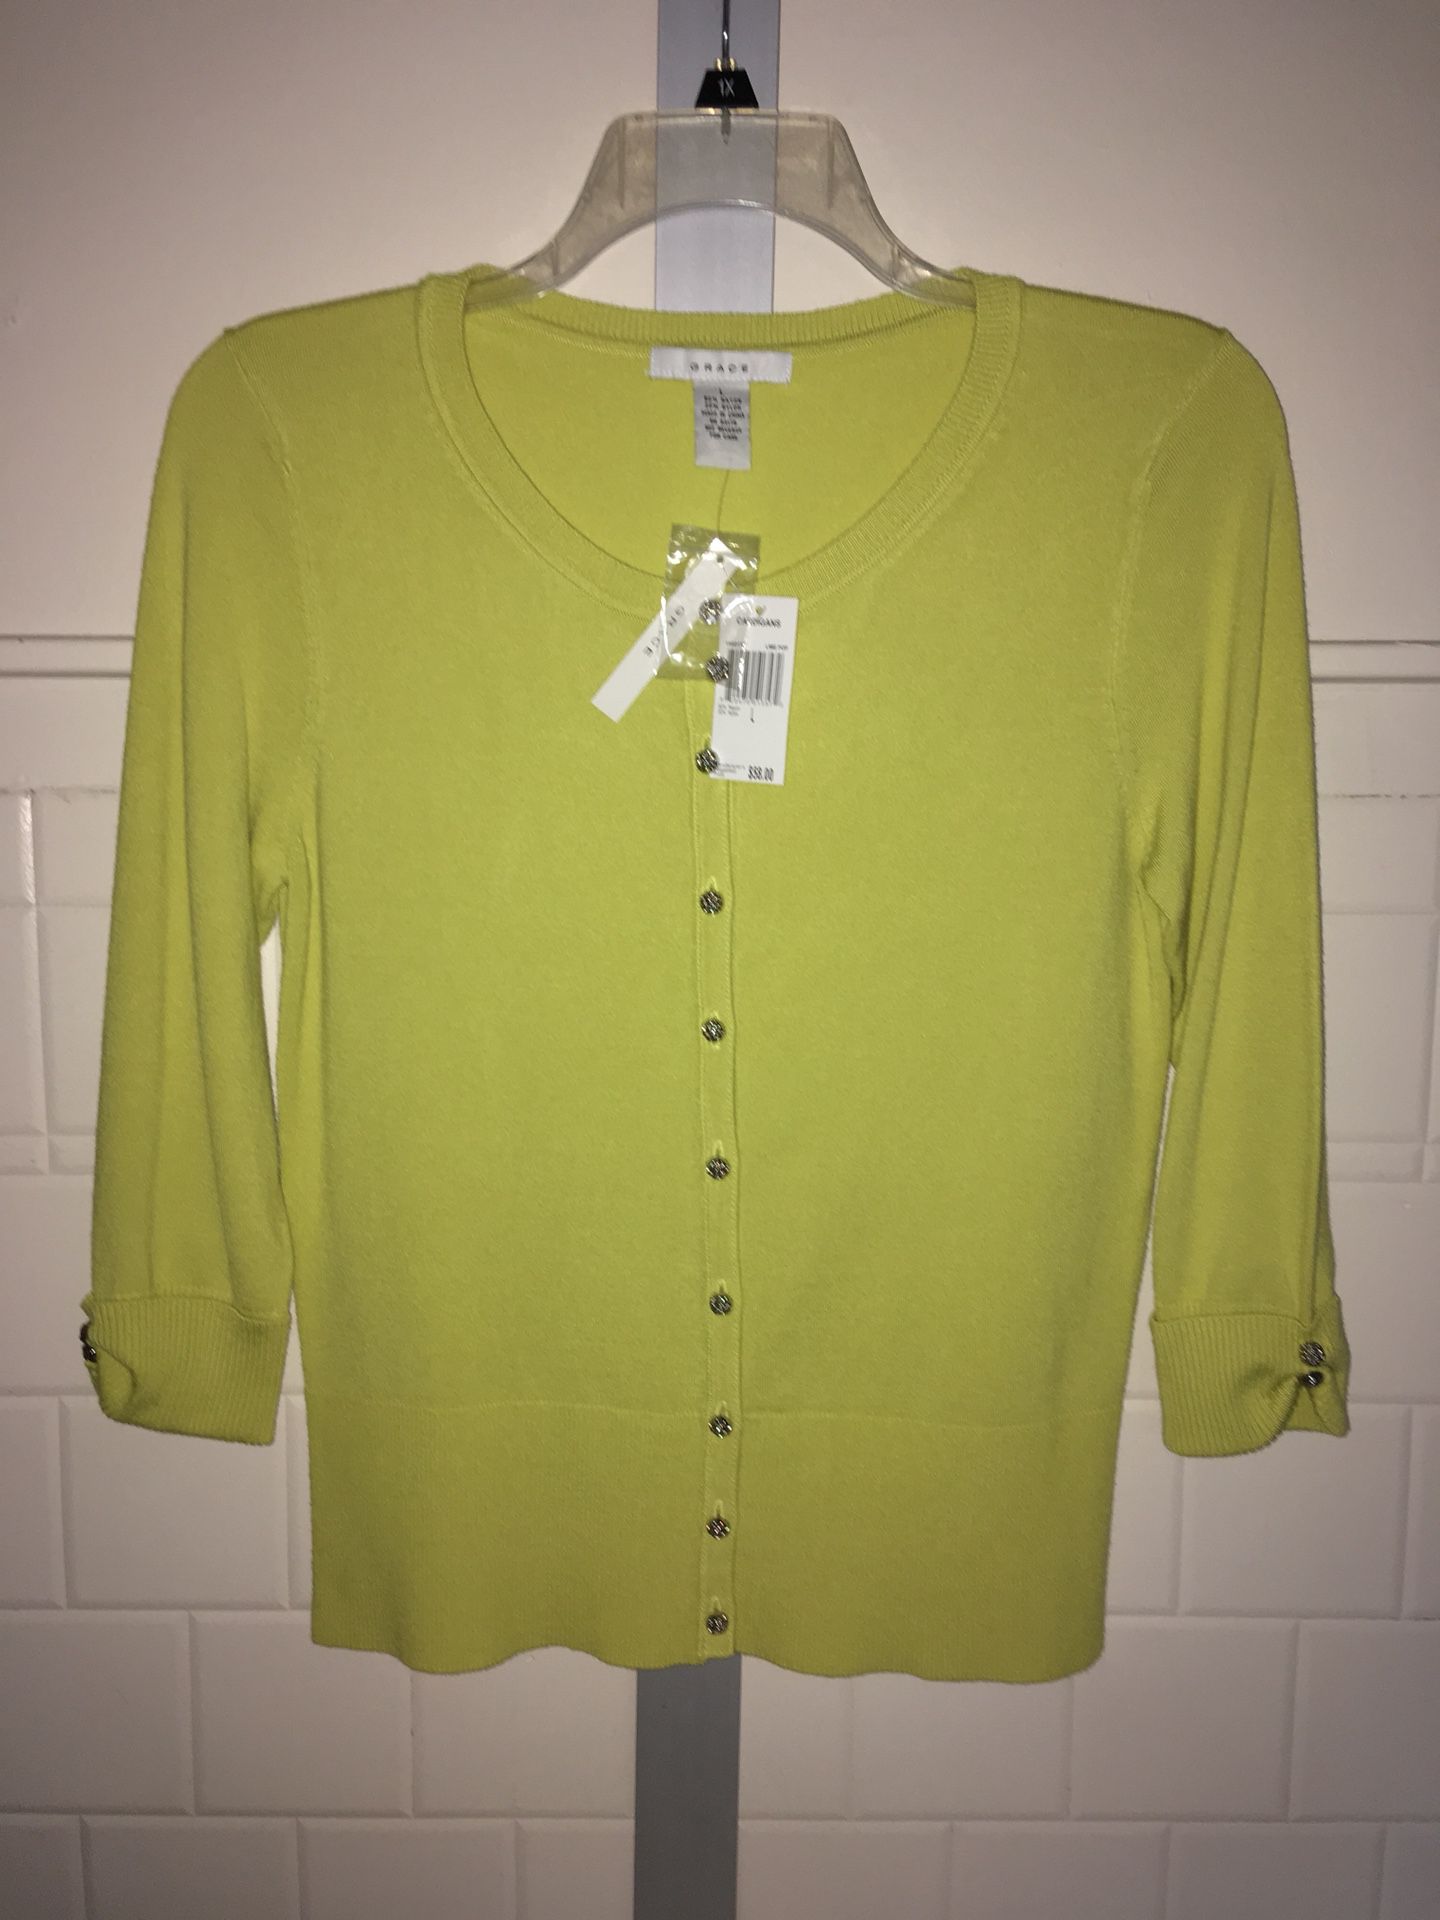 NEW CARDIGAN SWEATER Chartreuse adorned with Silver Rose Buttons